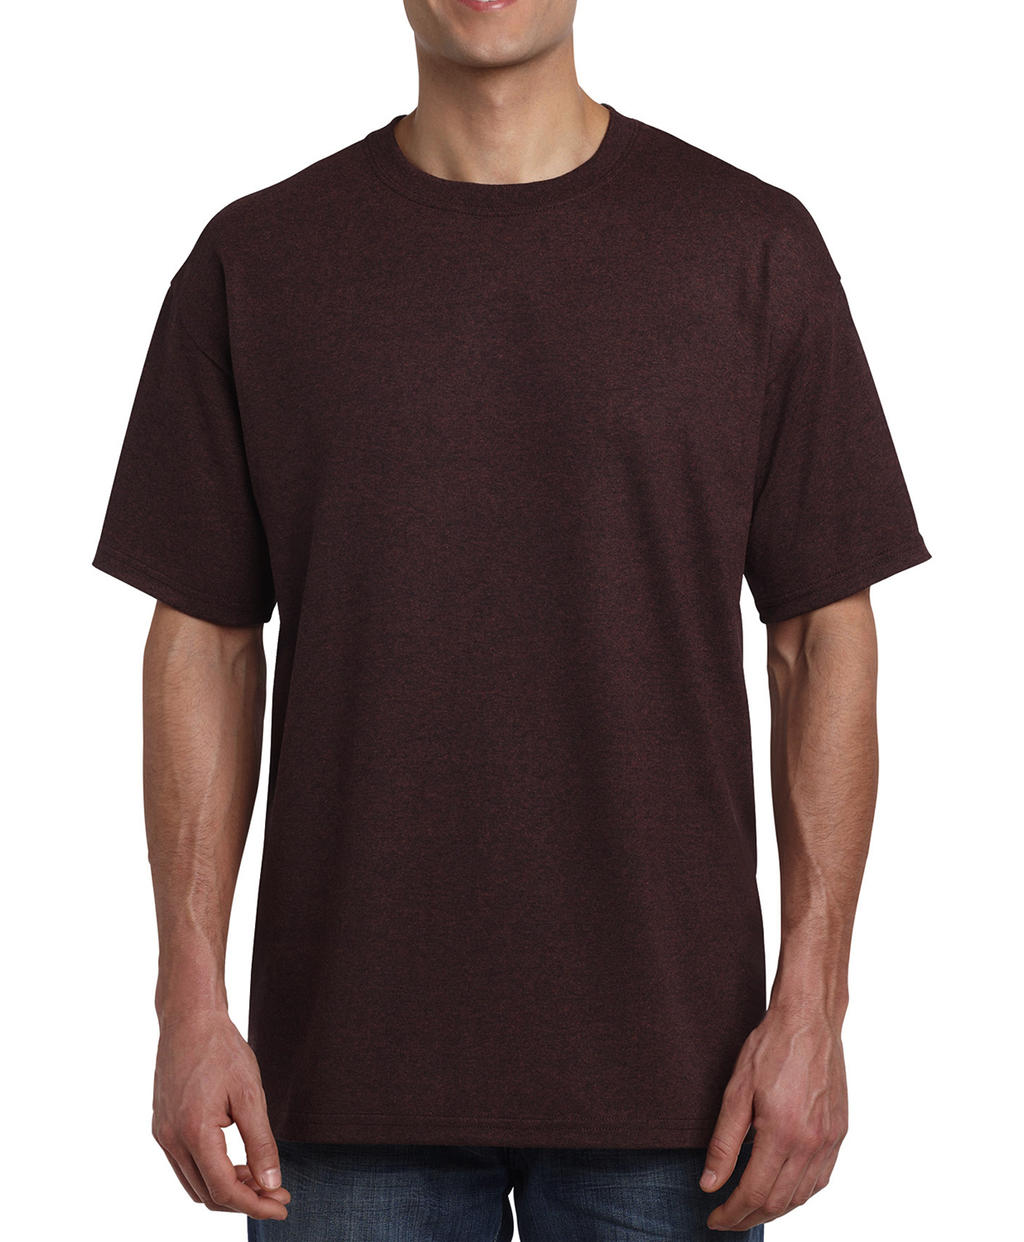  Heavy Cotton Adult T-Shirt in Farbe Russet